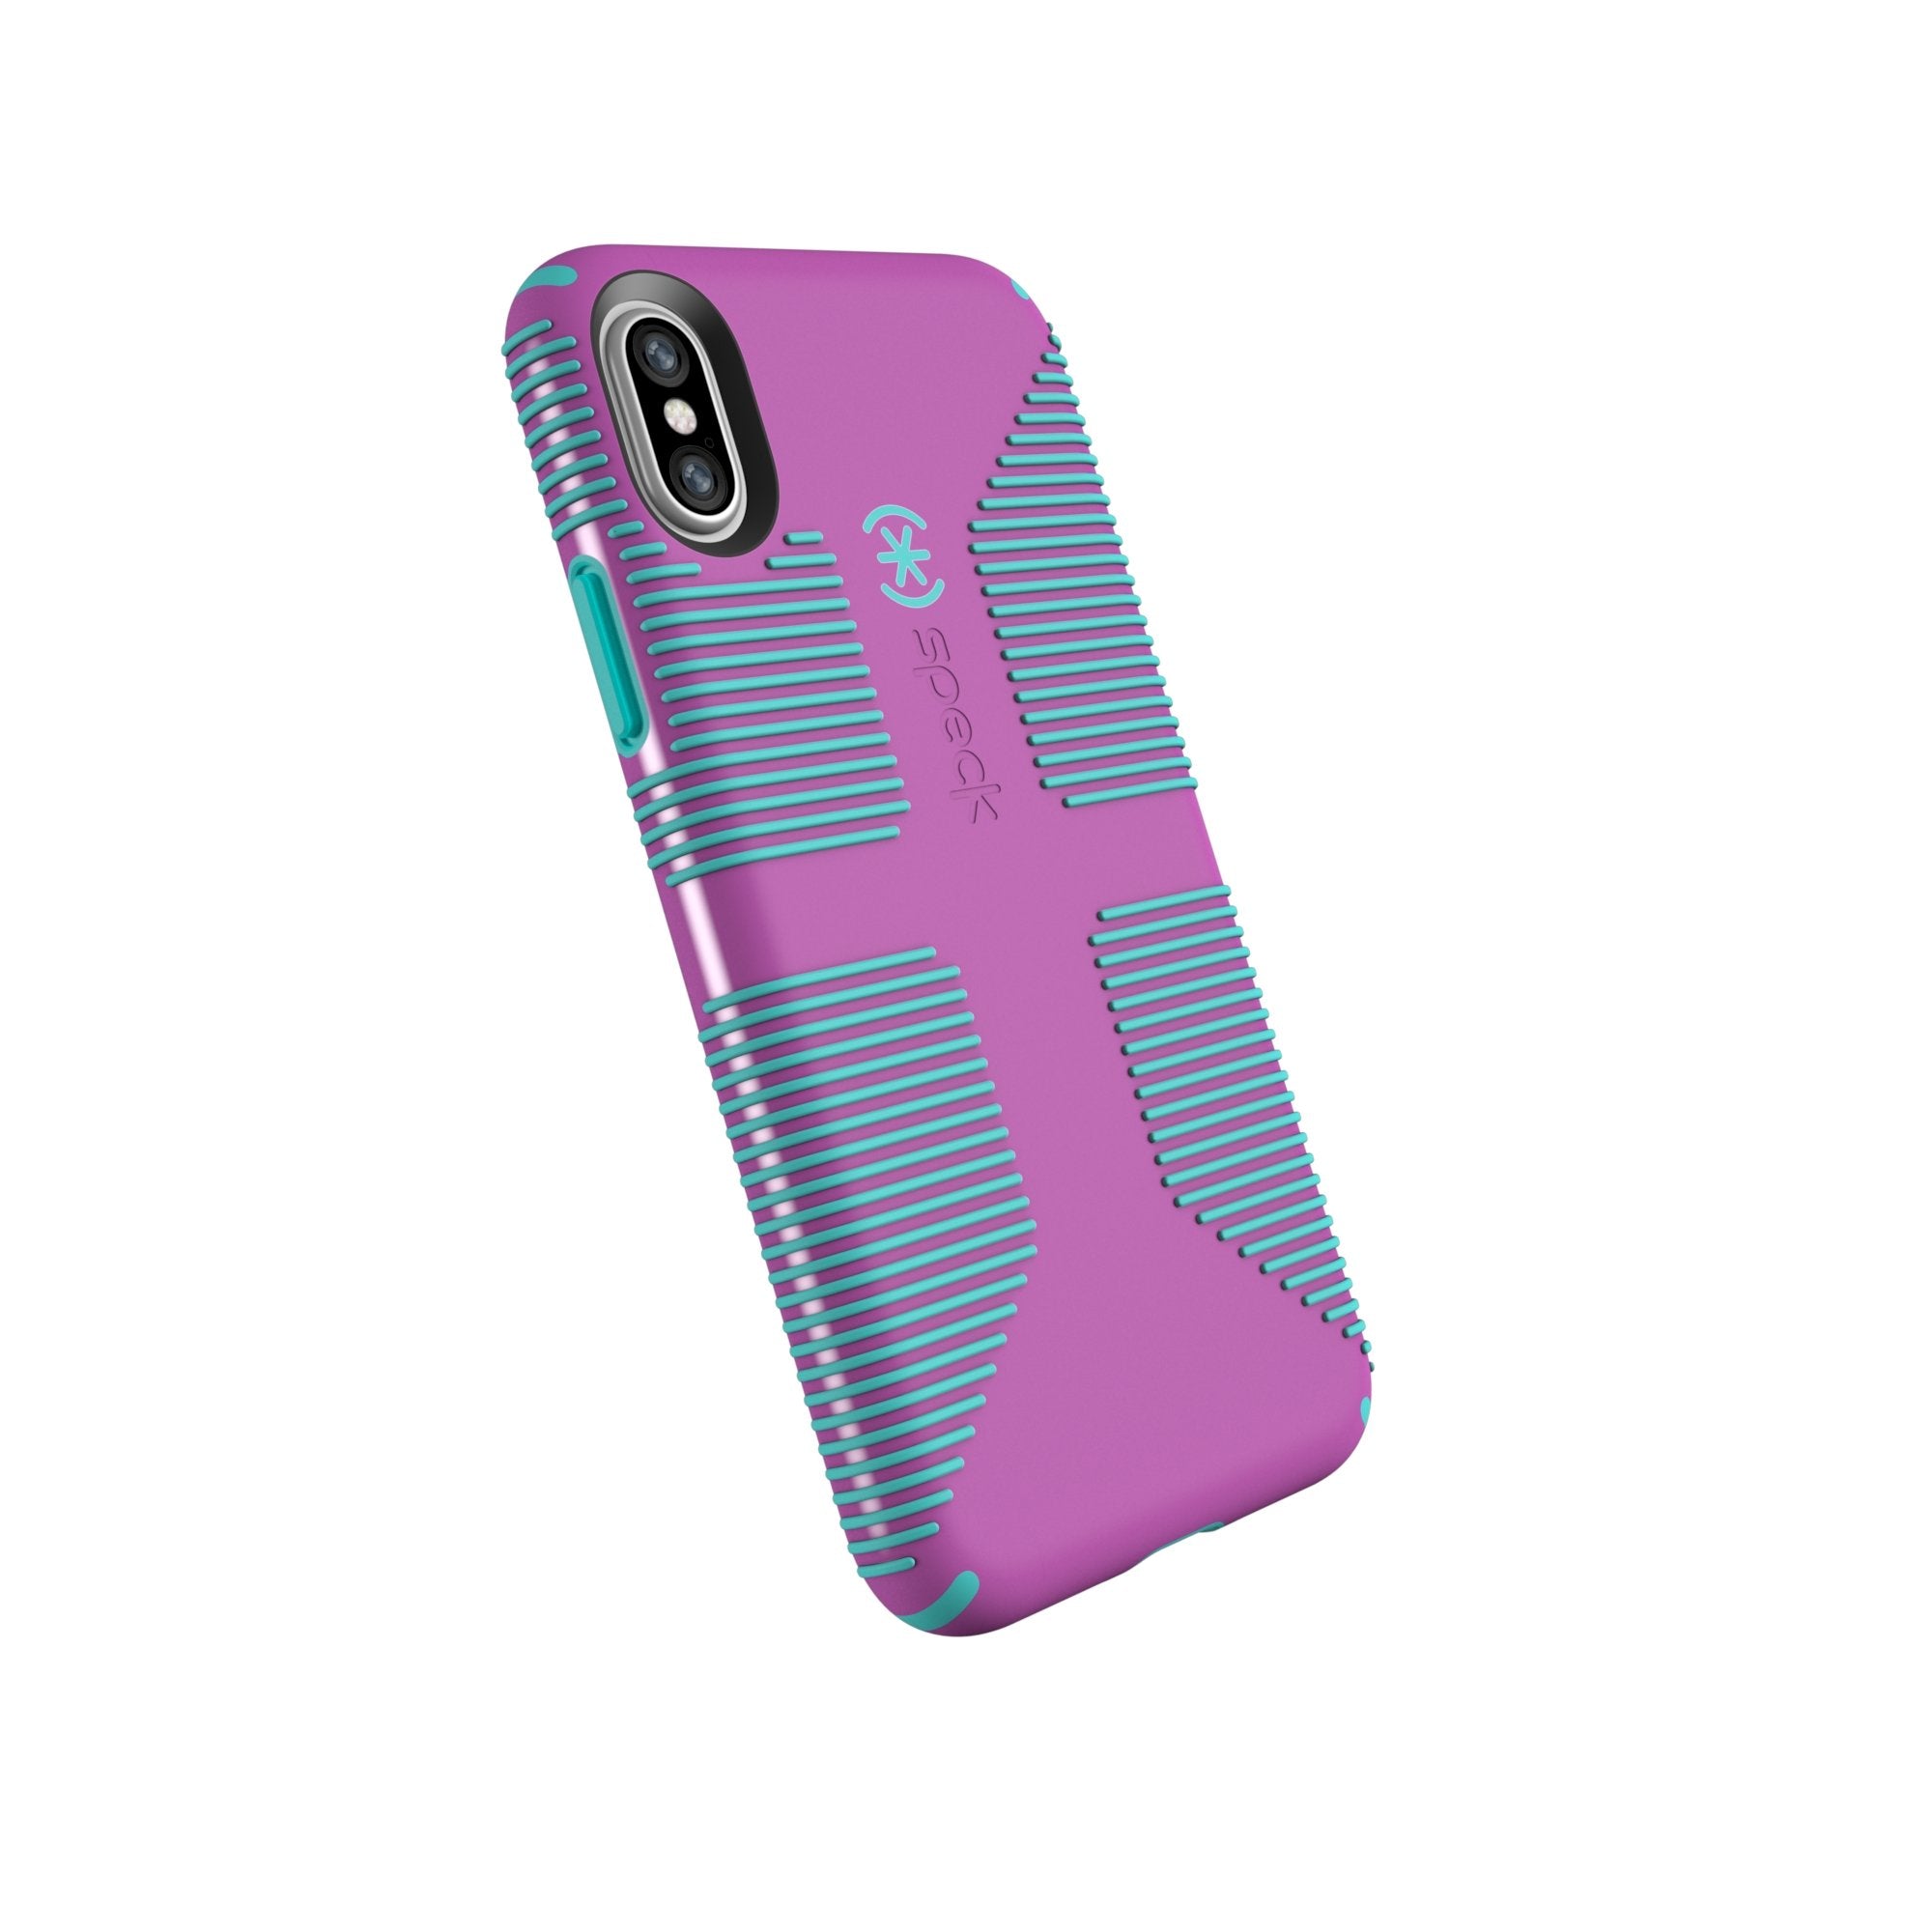 Speck Products CandyShell Grip iPhone Xs/iPhone X Case  - Very Good